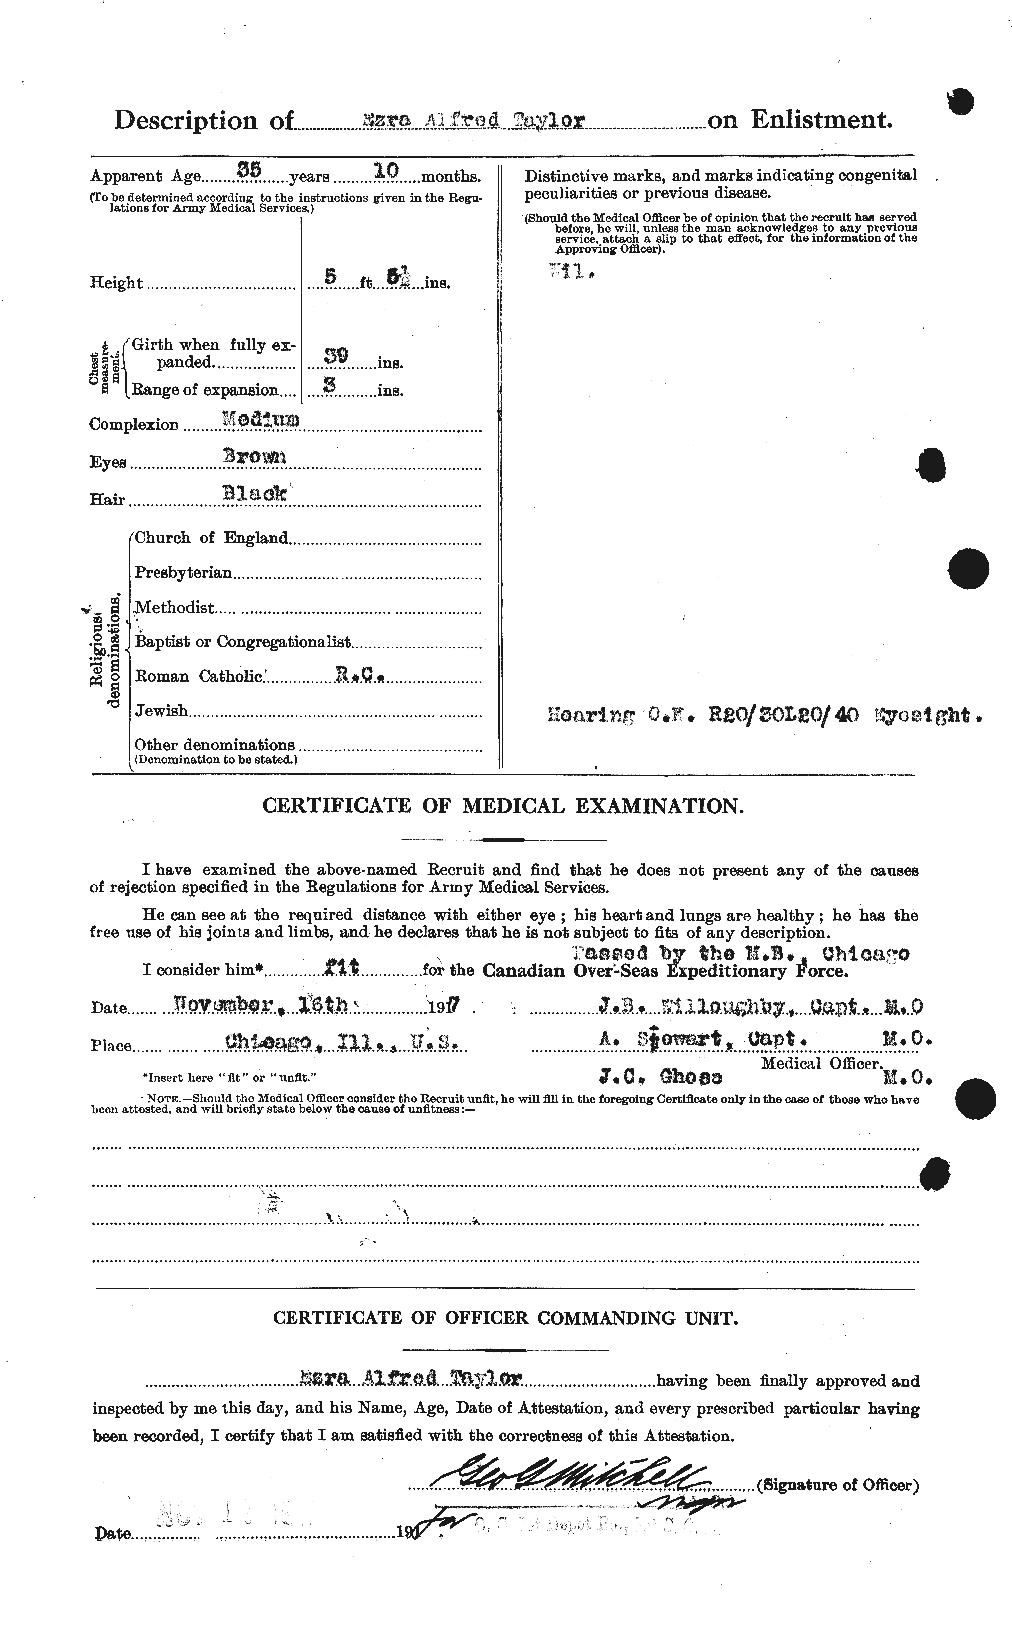 Personnel Records of the First World War - CEF 627413b